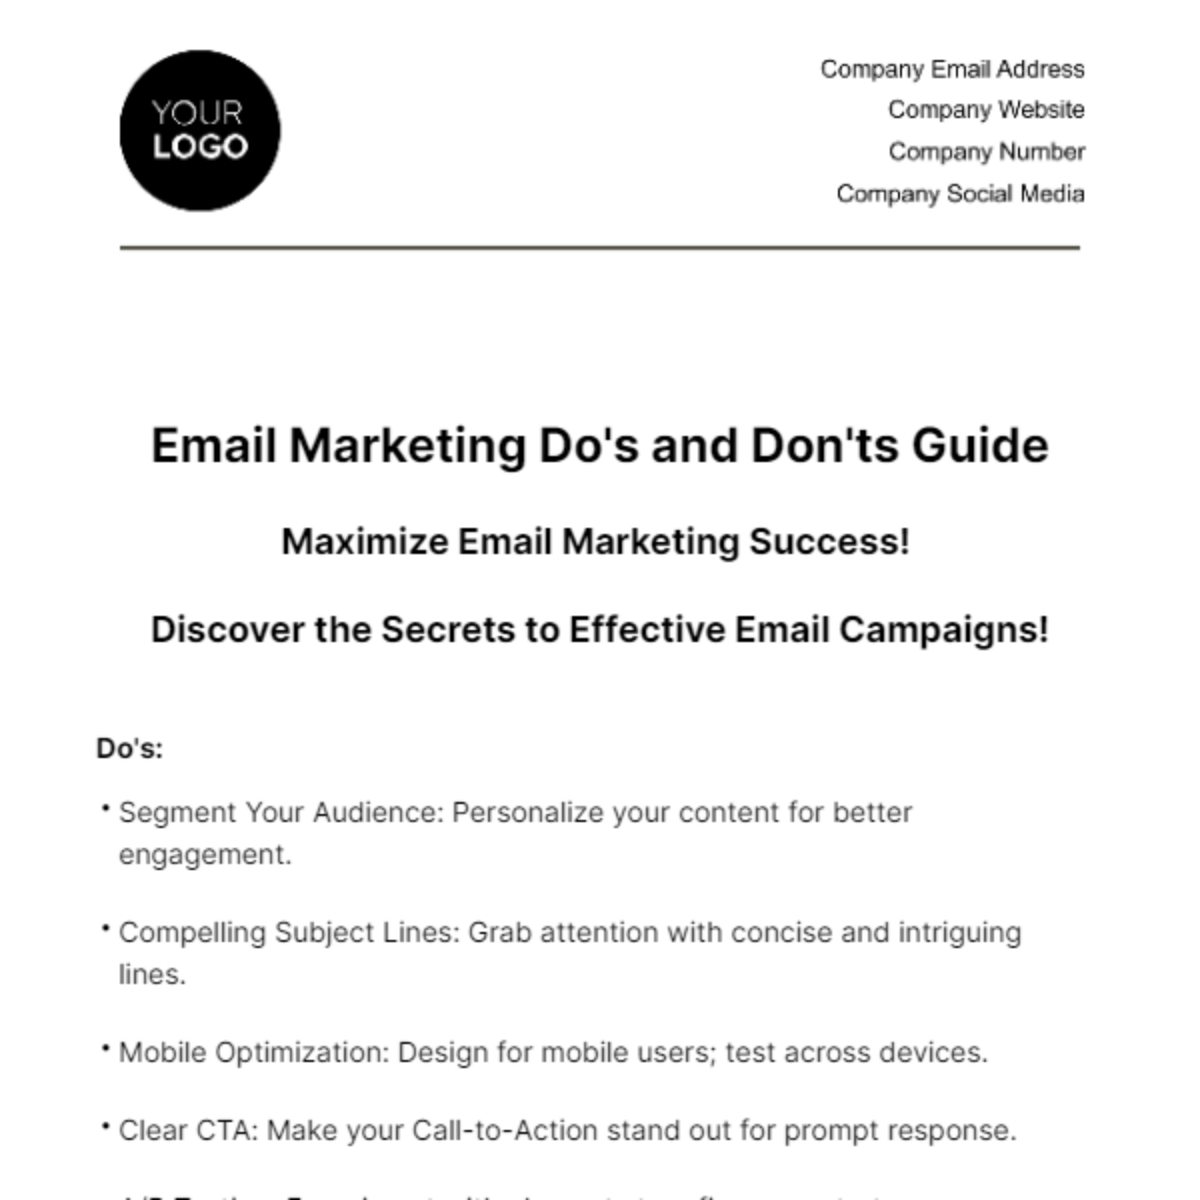 Email Marketing Do's and Don'ts Guide Template